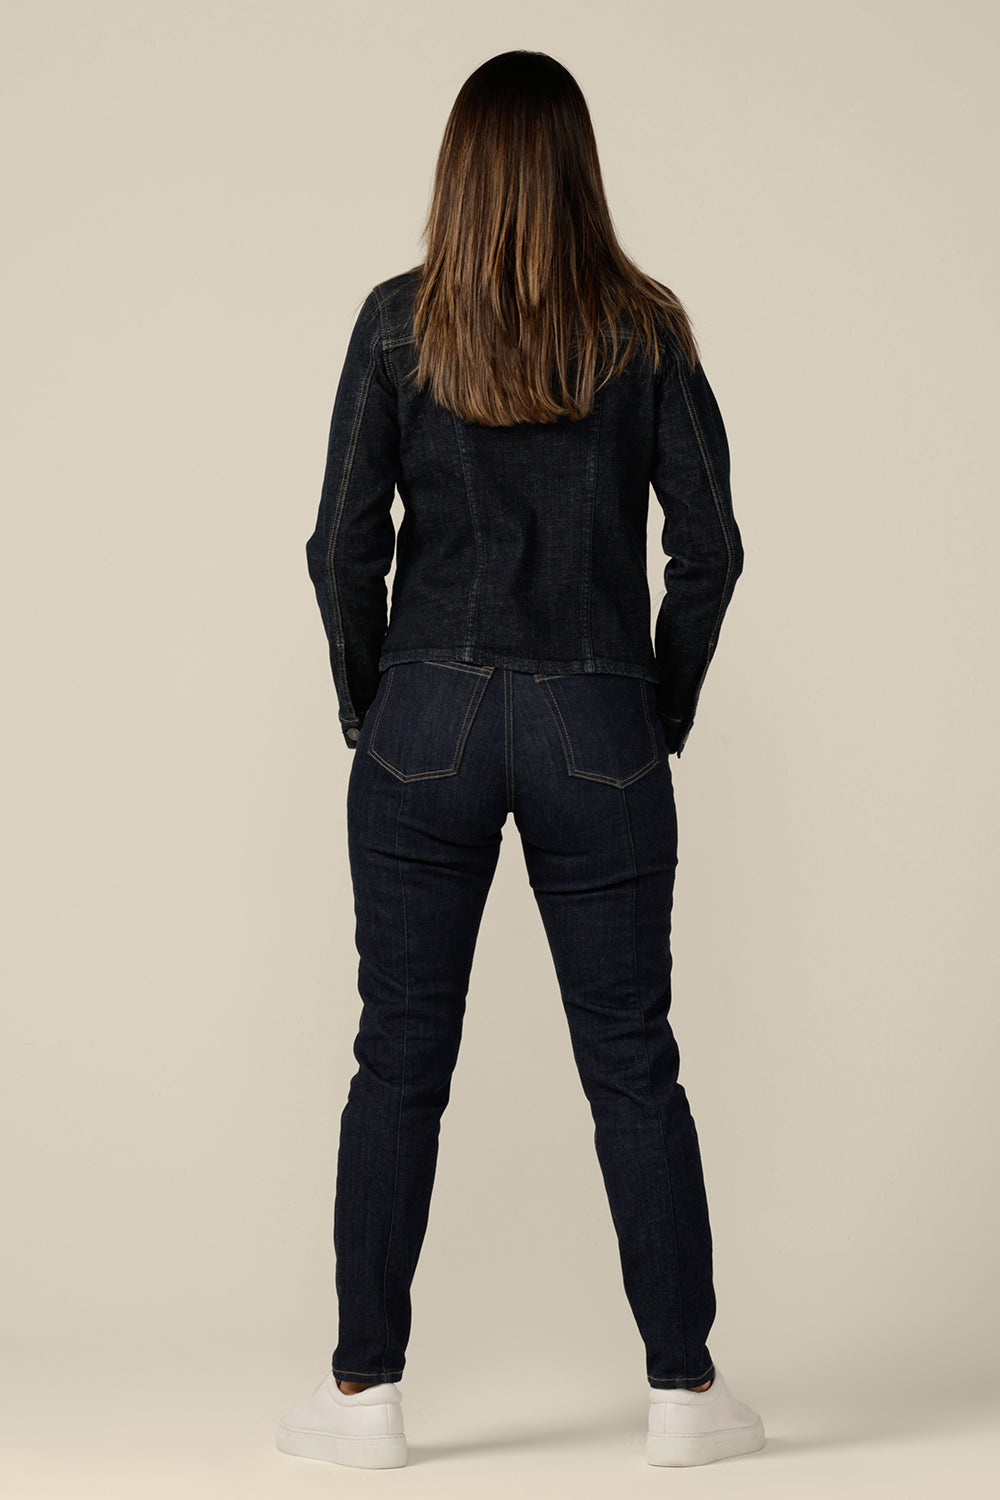 Back view of a collarless denim jacket in size 8 is worn with white bamboo jersey T-shirt and super-stretch skinny jeans. Ethically and sustainably made in partnership with Outland Denim, this denim jacket is tailored to fit women in sizes 8 to 24 by Australian and New Zealand women's clothing label, L&F.